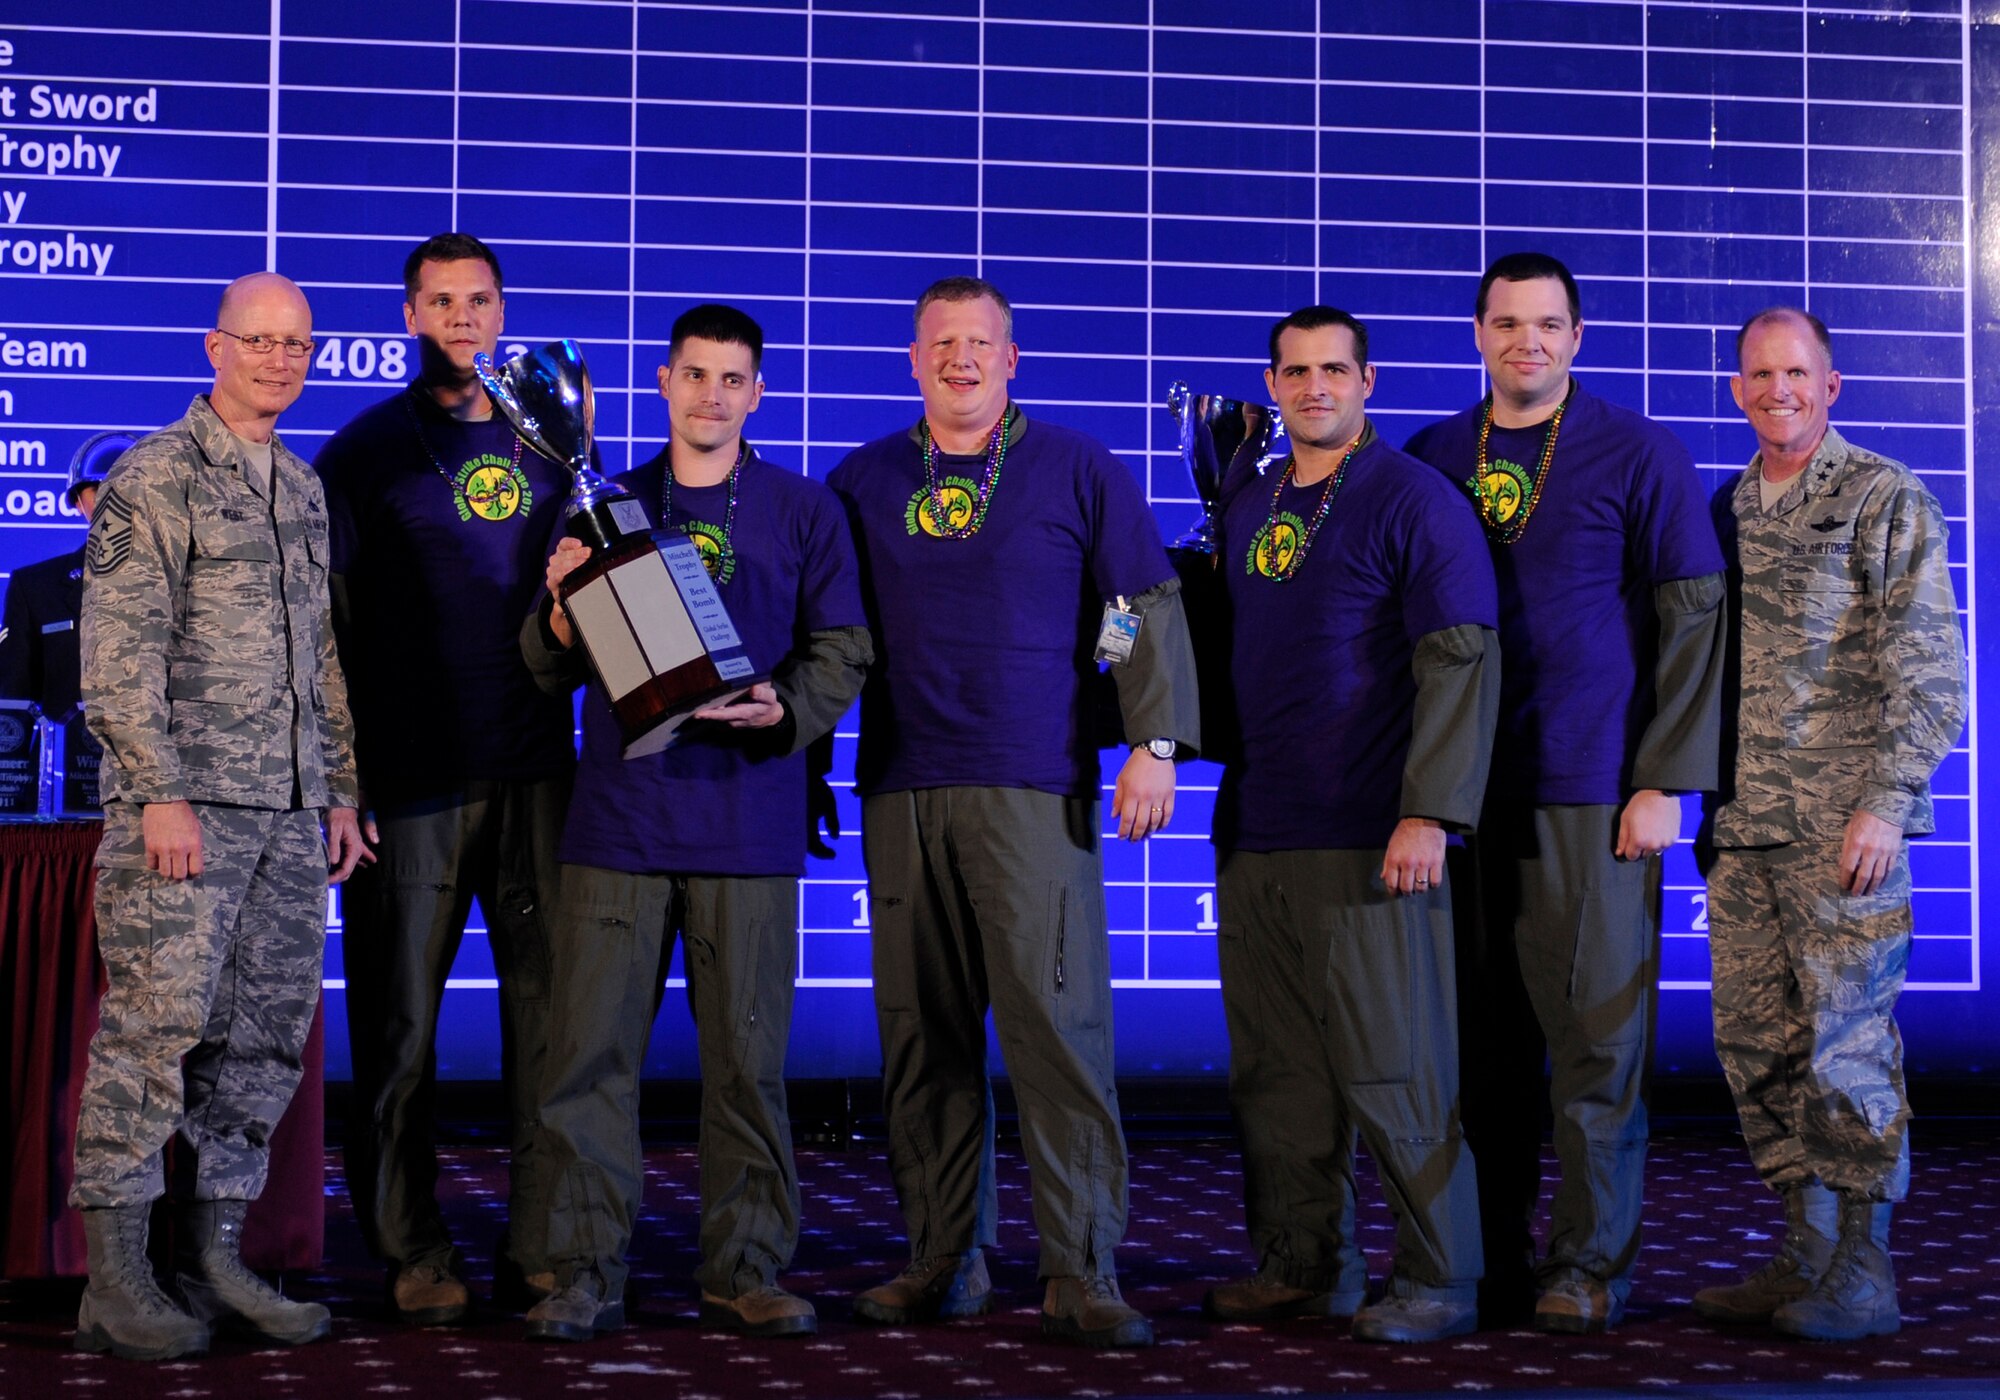 BARKSDALE AFB, La. - The 96th Bomb Squadron from Barksdale Air Force Base, La., was awarded the Mitchell Trophy for Best Bomb during the first round of score posting of Global Strike Challenge at Barksdale Air Force Base, Nov. 8. (U.S. Air Force photo/Airman 1st Class Micaiah Anthony)